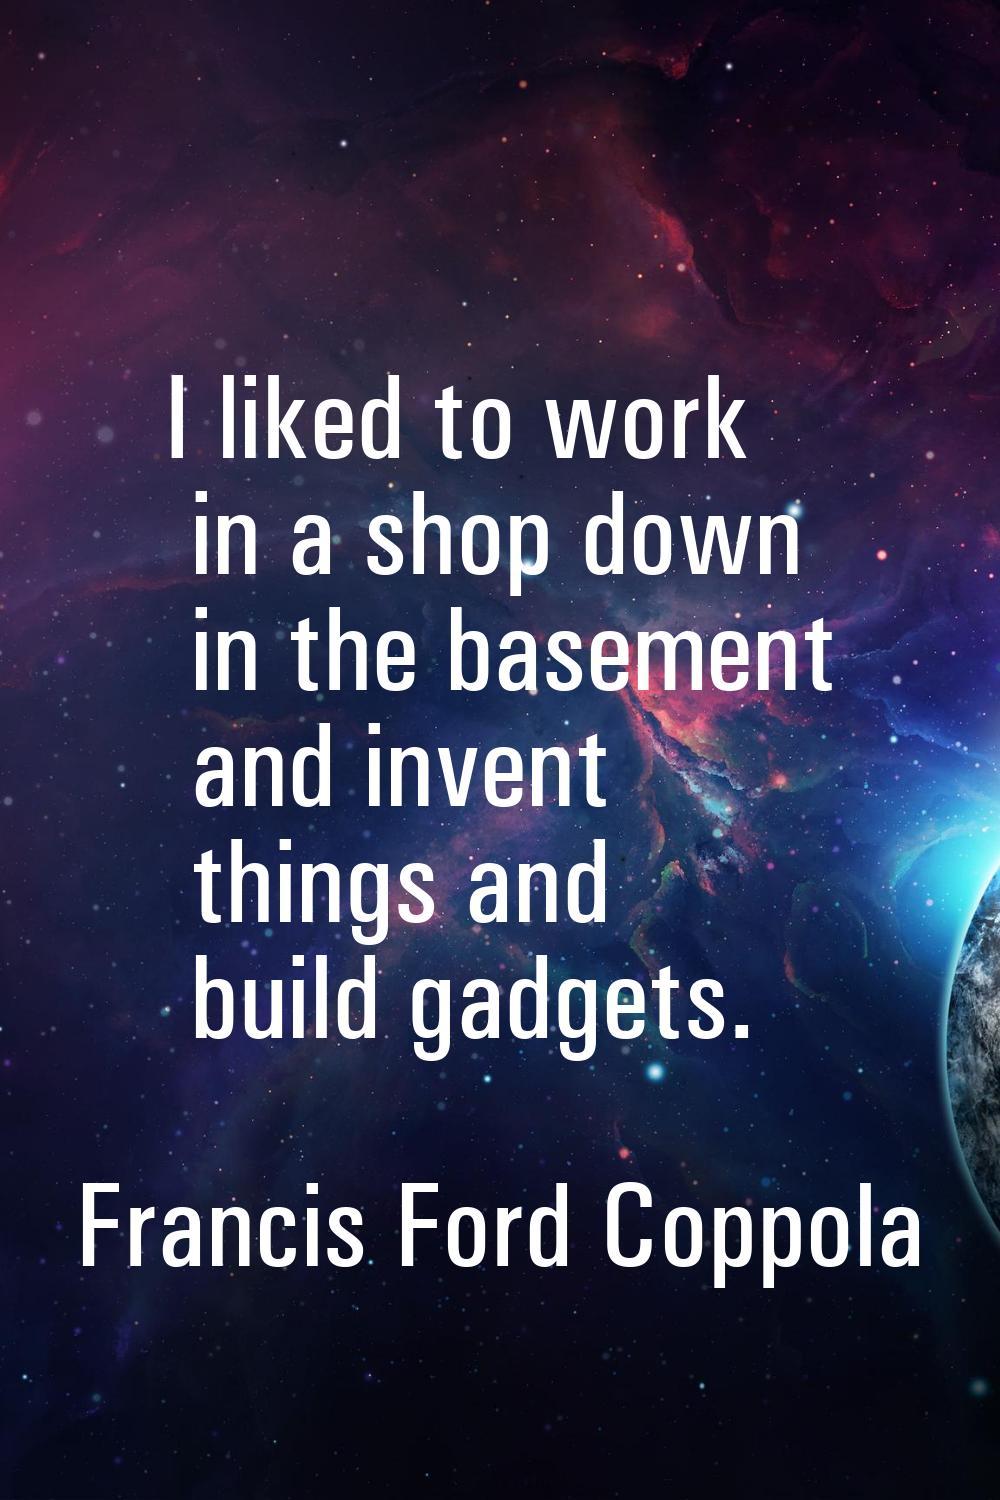 I liked to work in a shop down in the basement and invent things and build gadgets.